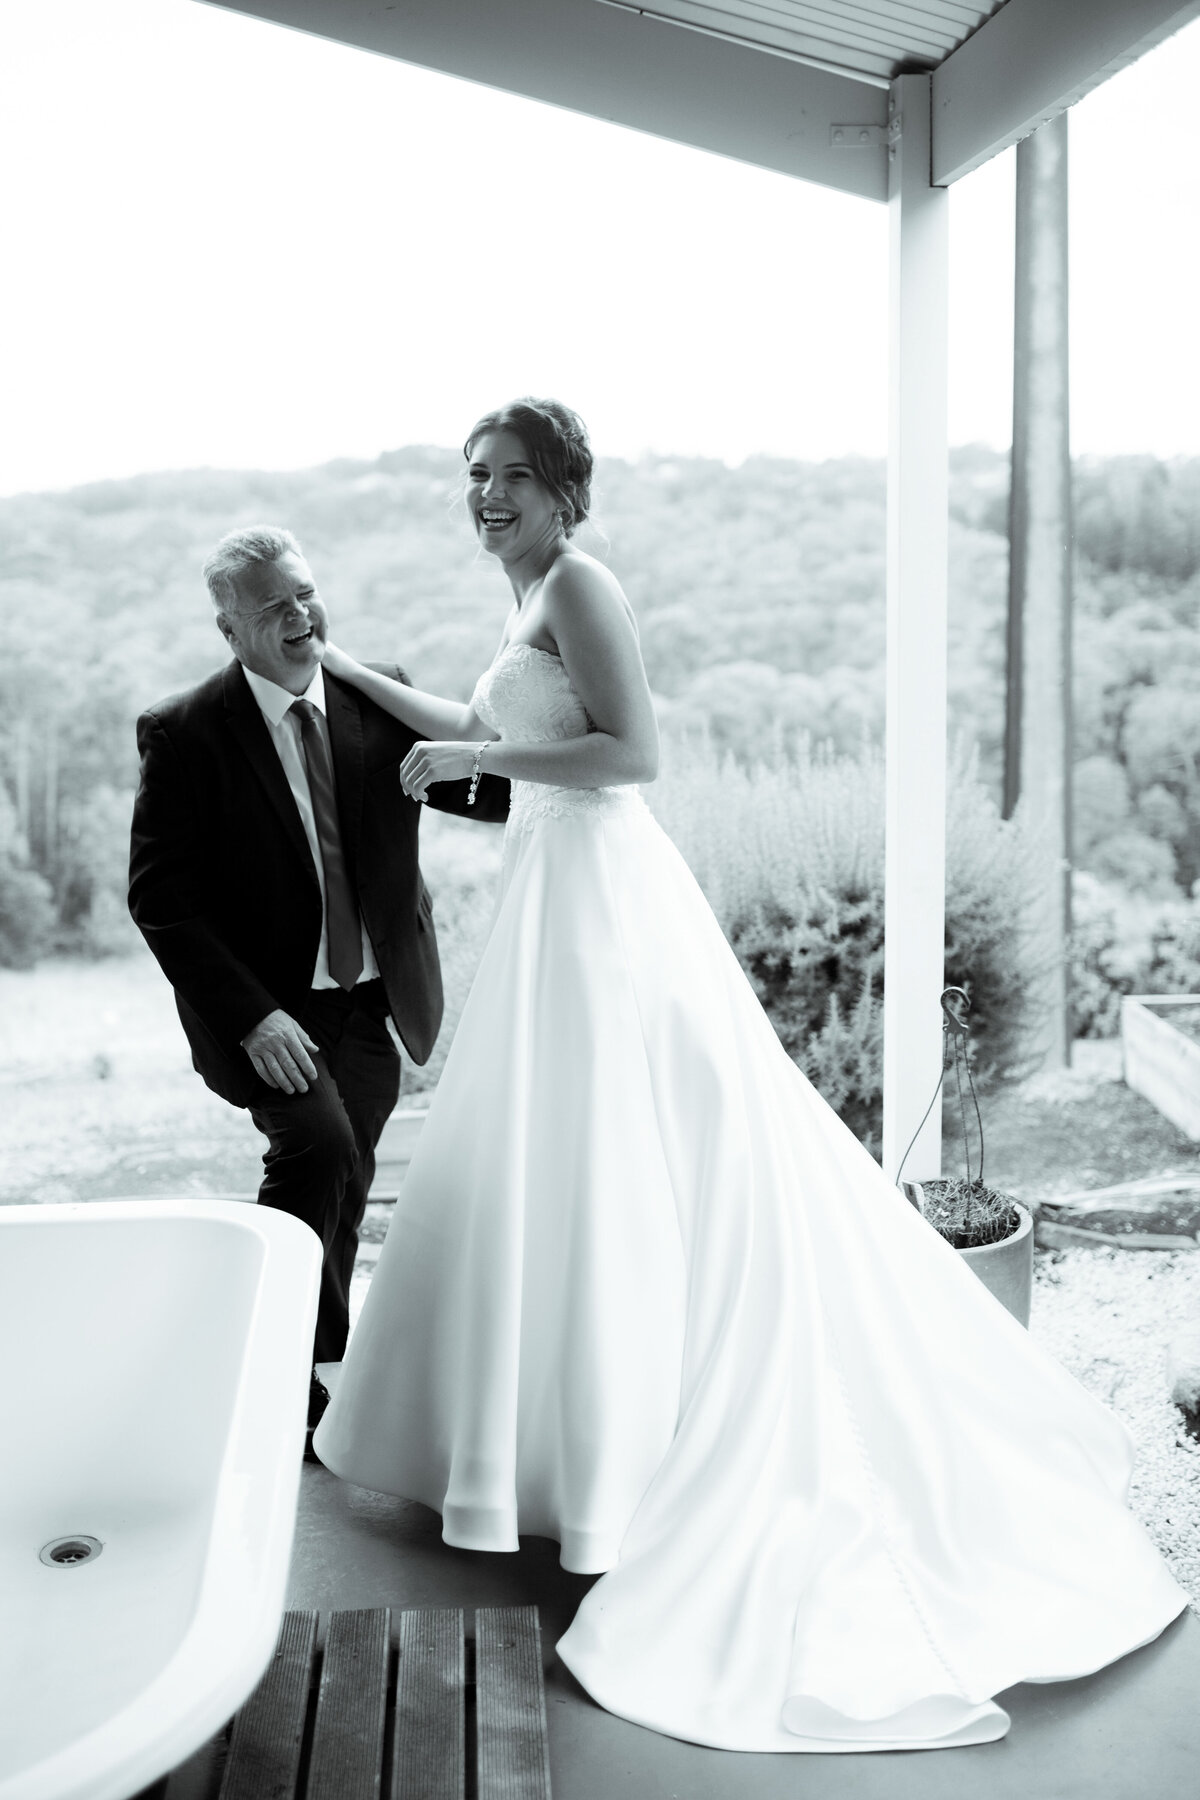 M&R-Anderson-Hill-Rexvil-Photography-Adelaide-Wedding-Photographer-183